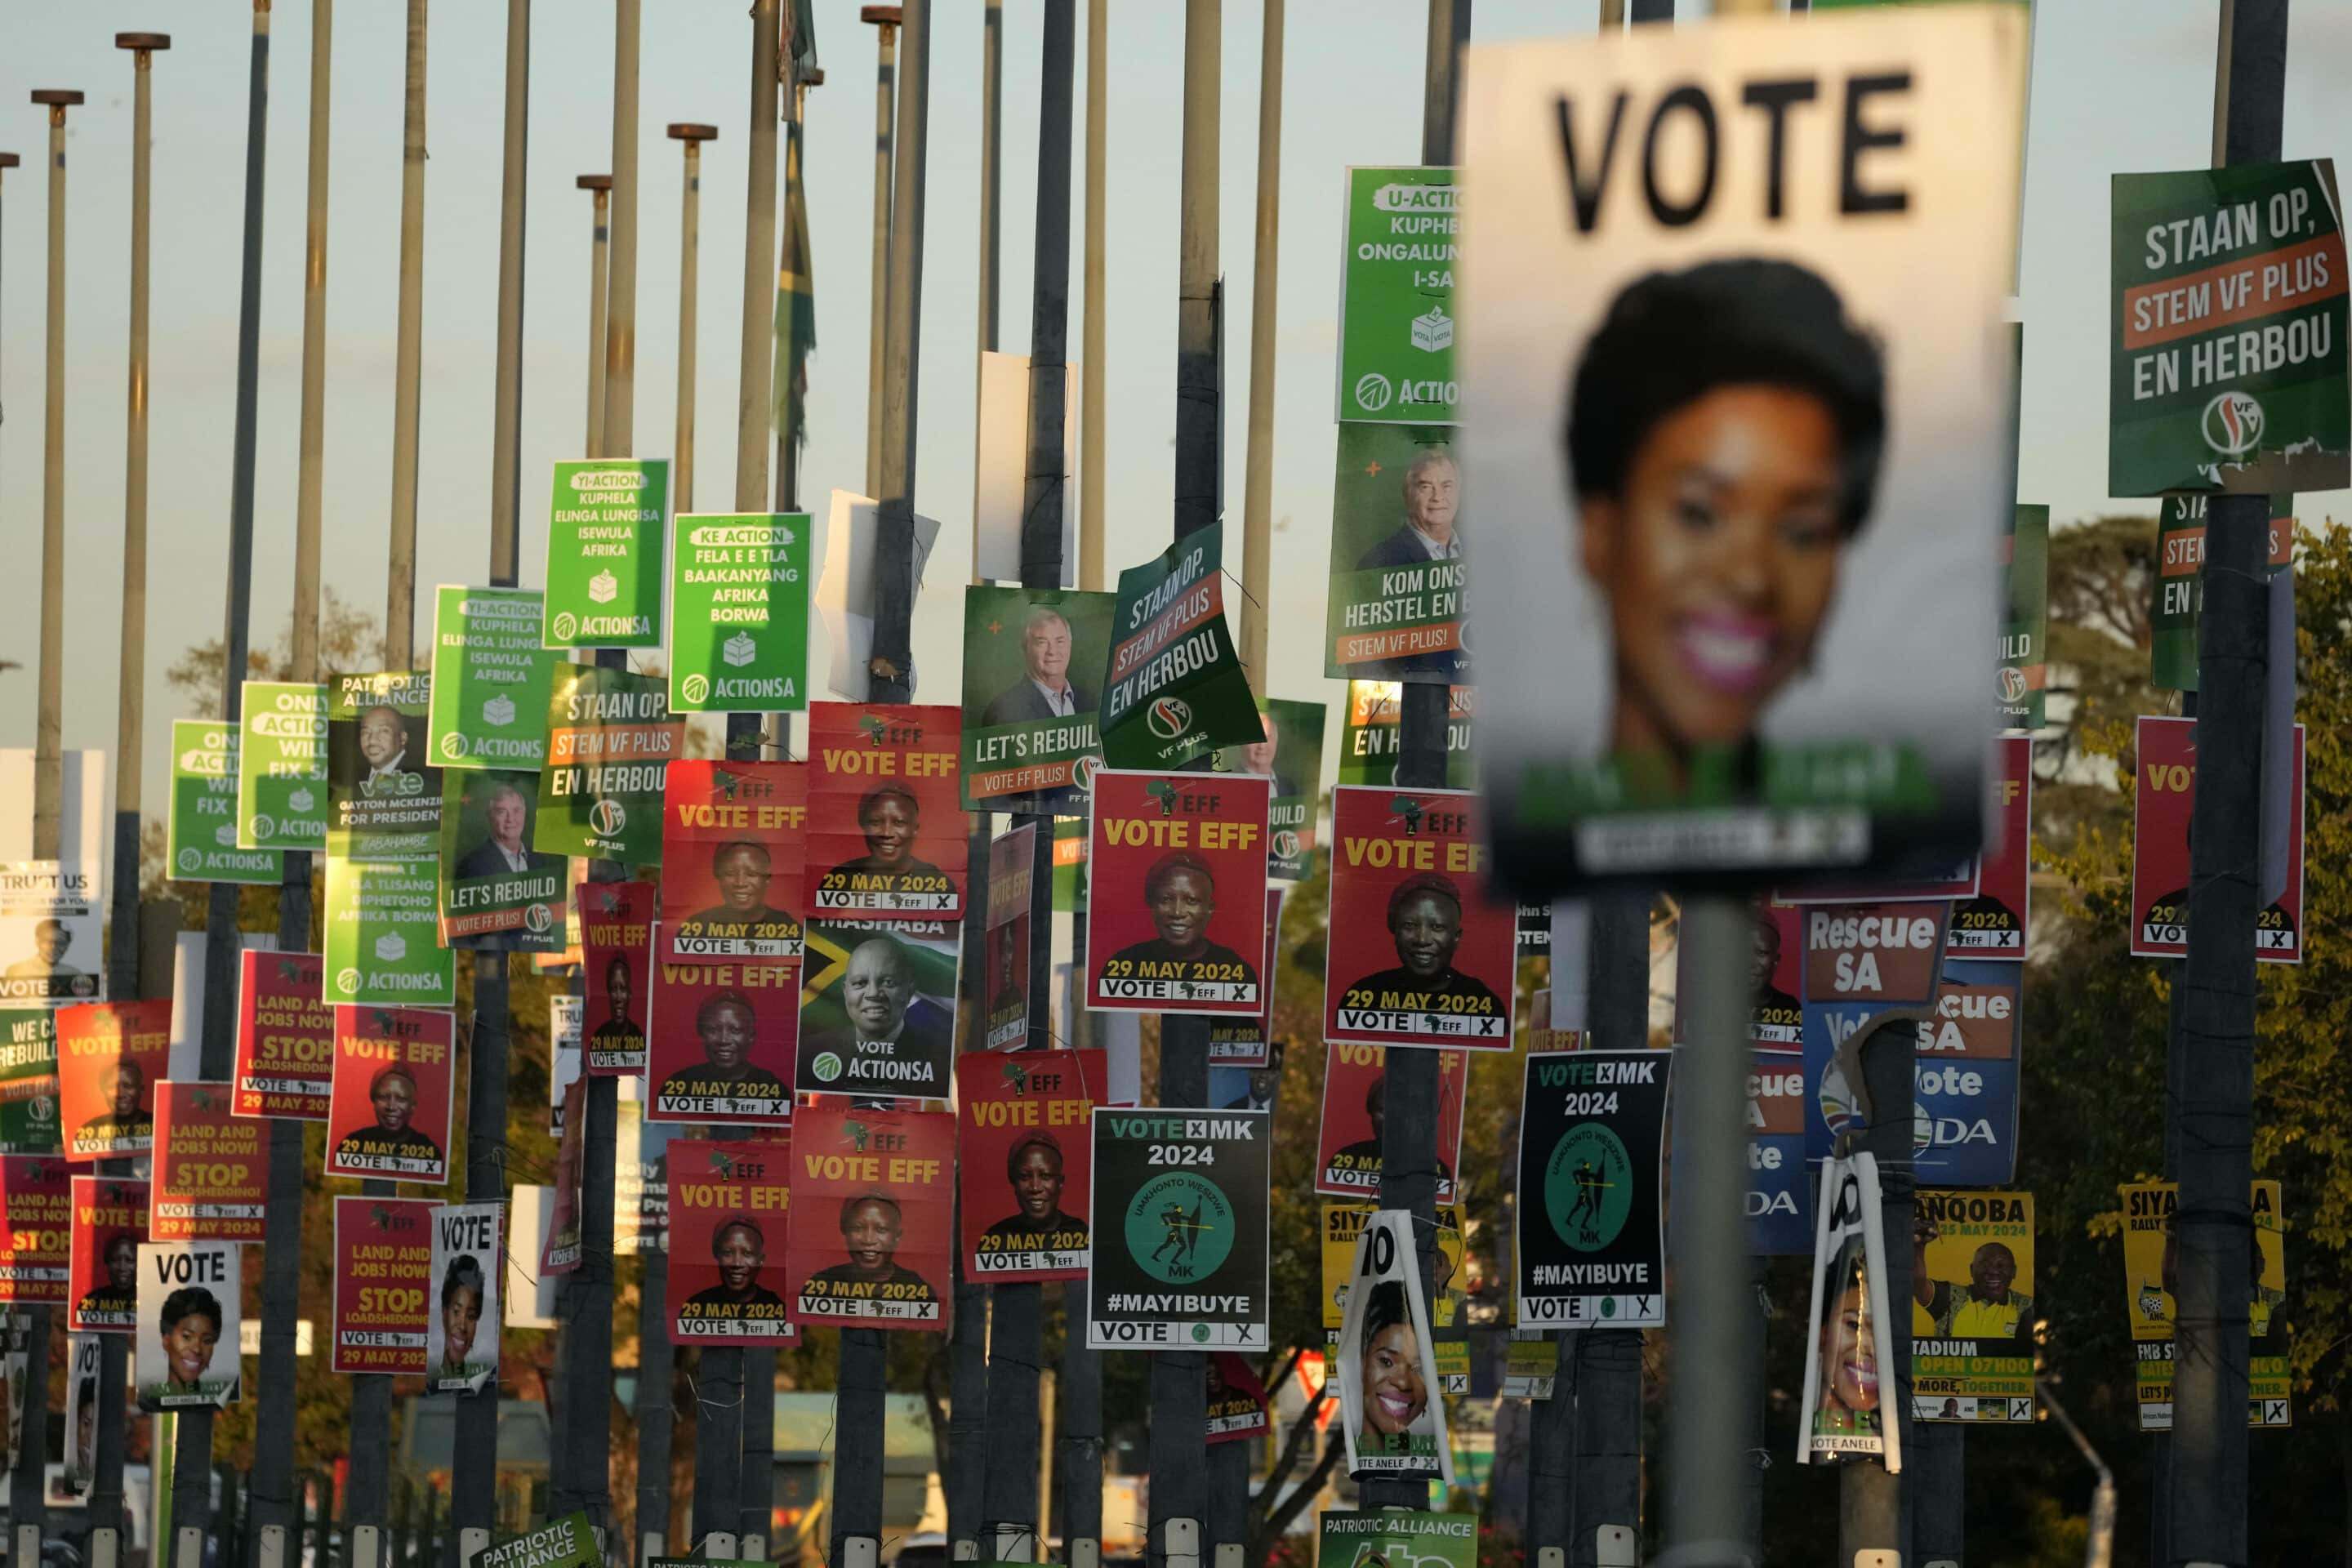 Election posters from various political parties are displayed on poles in Pretoria, South Africa, May 16, 2024. (AP Photo/Themba Hadebe)/TCH102/24137259156594//2405160922